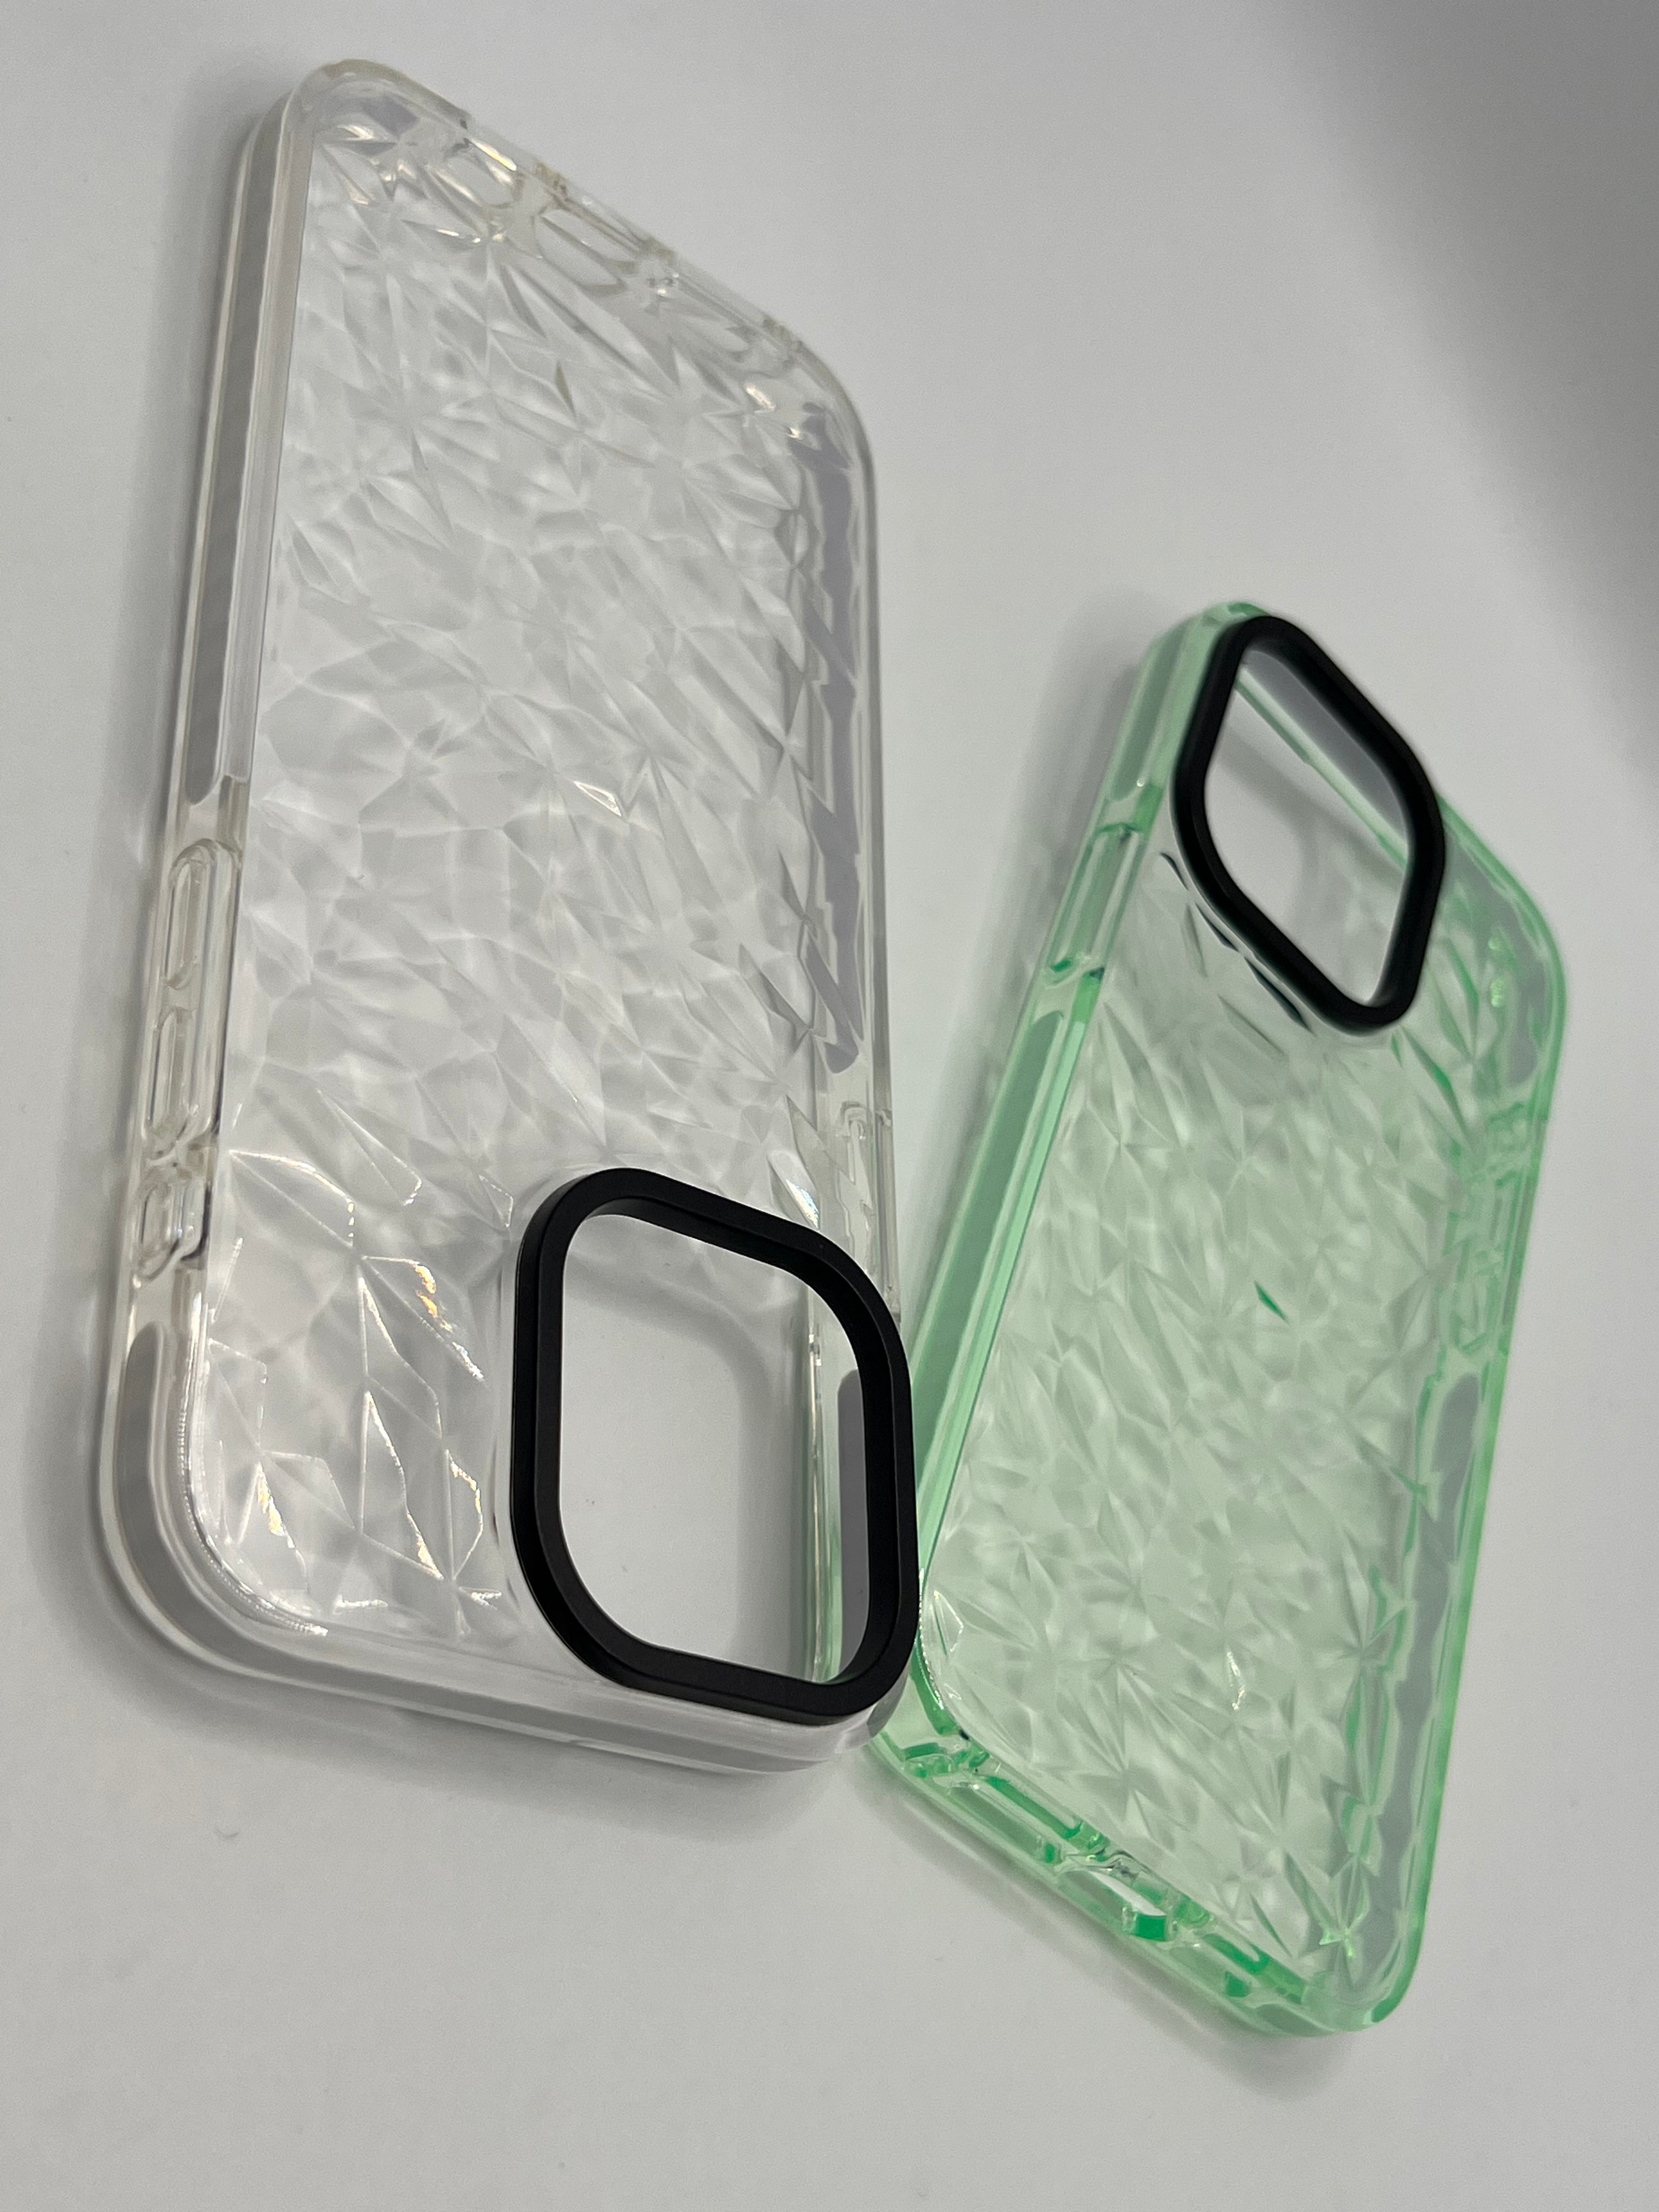 iPhone 12 Pro Max T21 Pattern Case